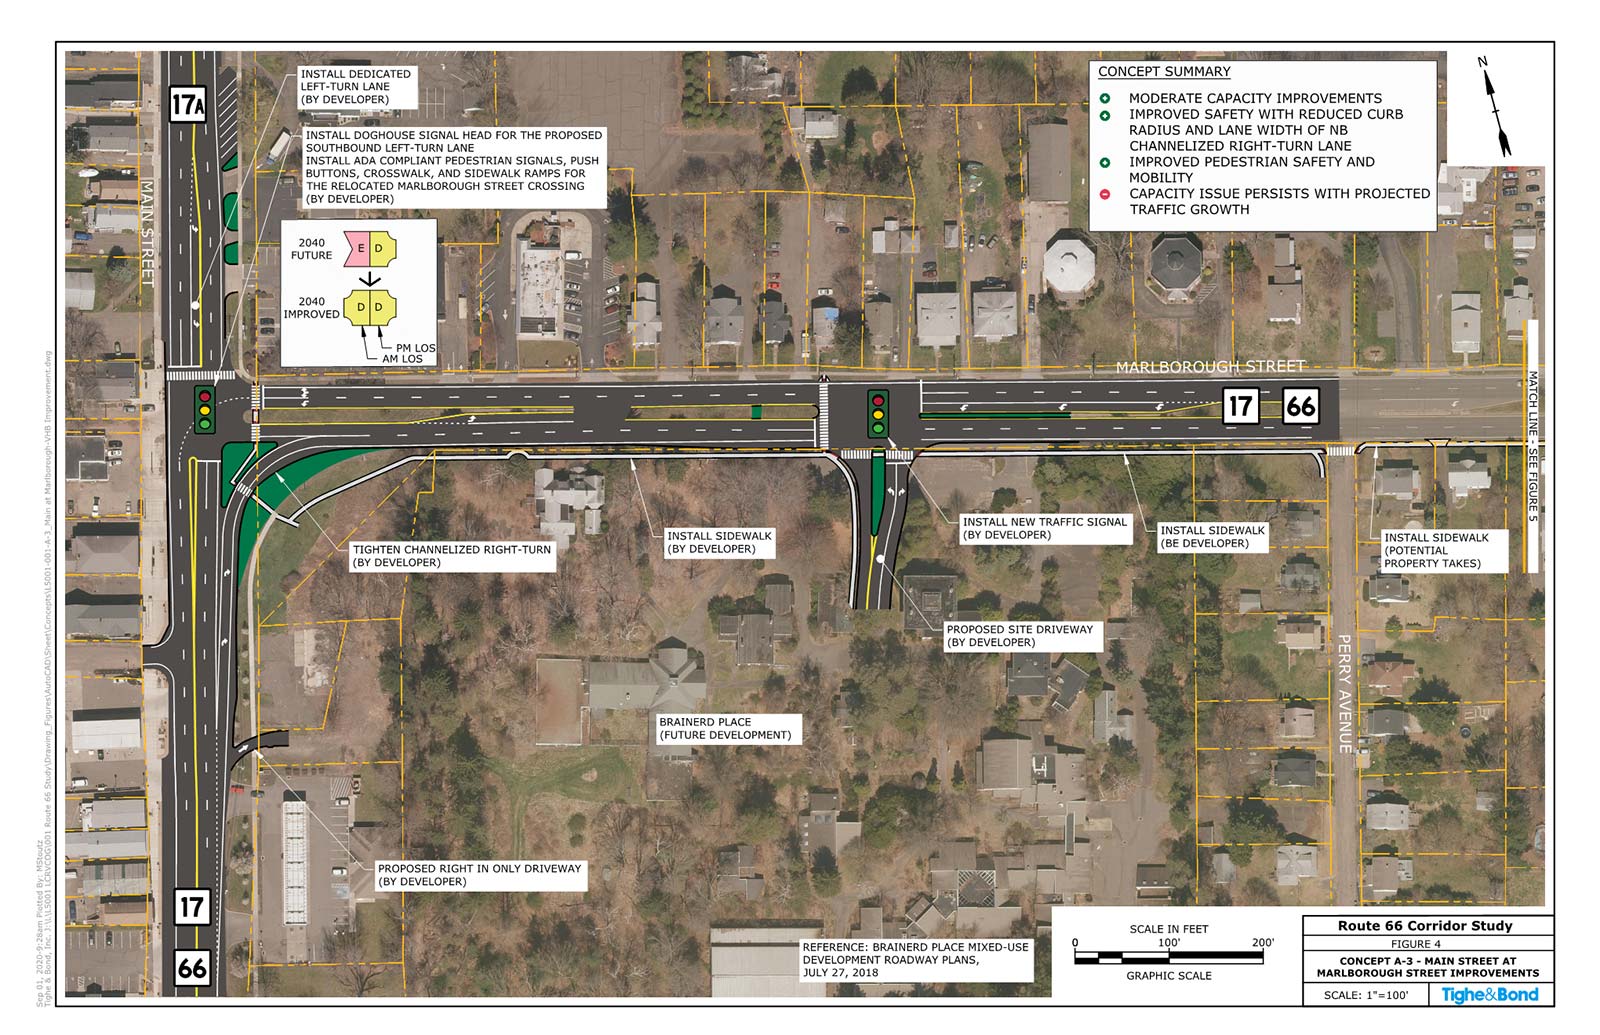 Marlborough Street at Main Street Intersection Improvements (Concept A-3). Route 66 Transportation Study, Portland and East Hampton, CT.